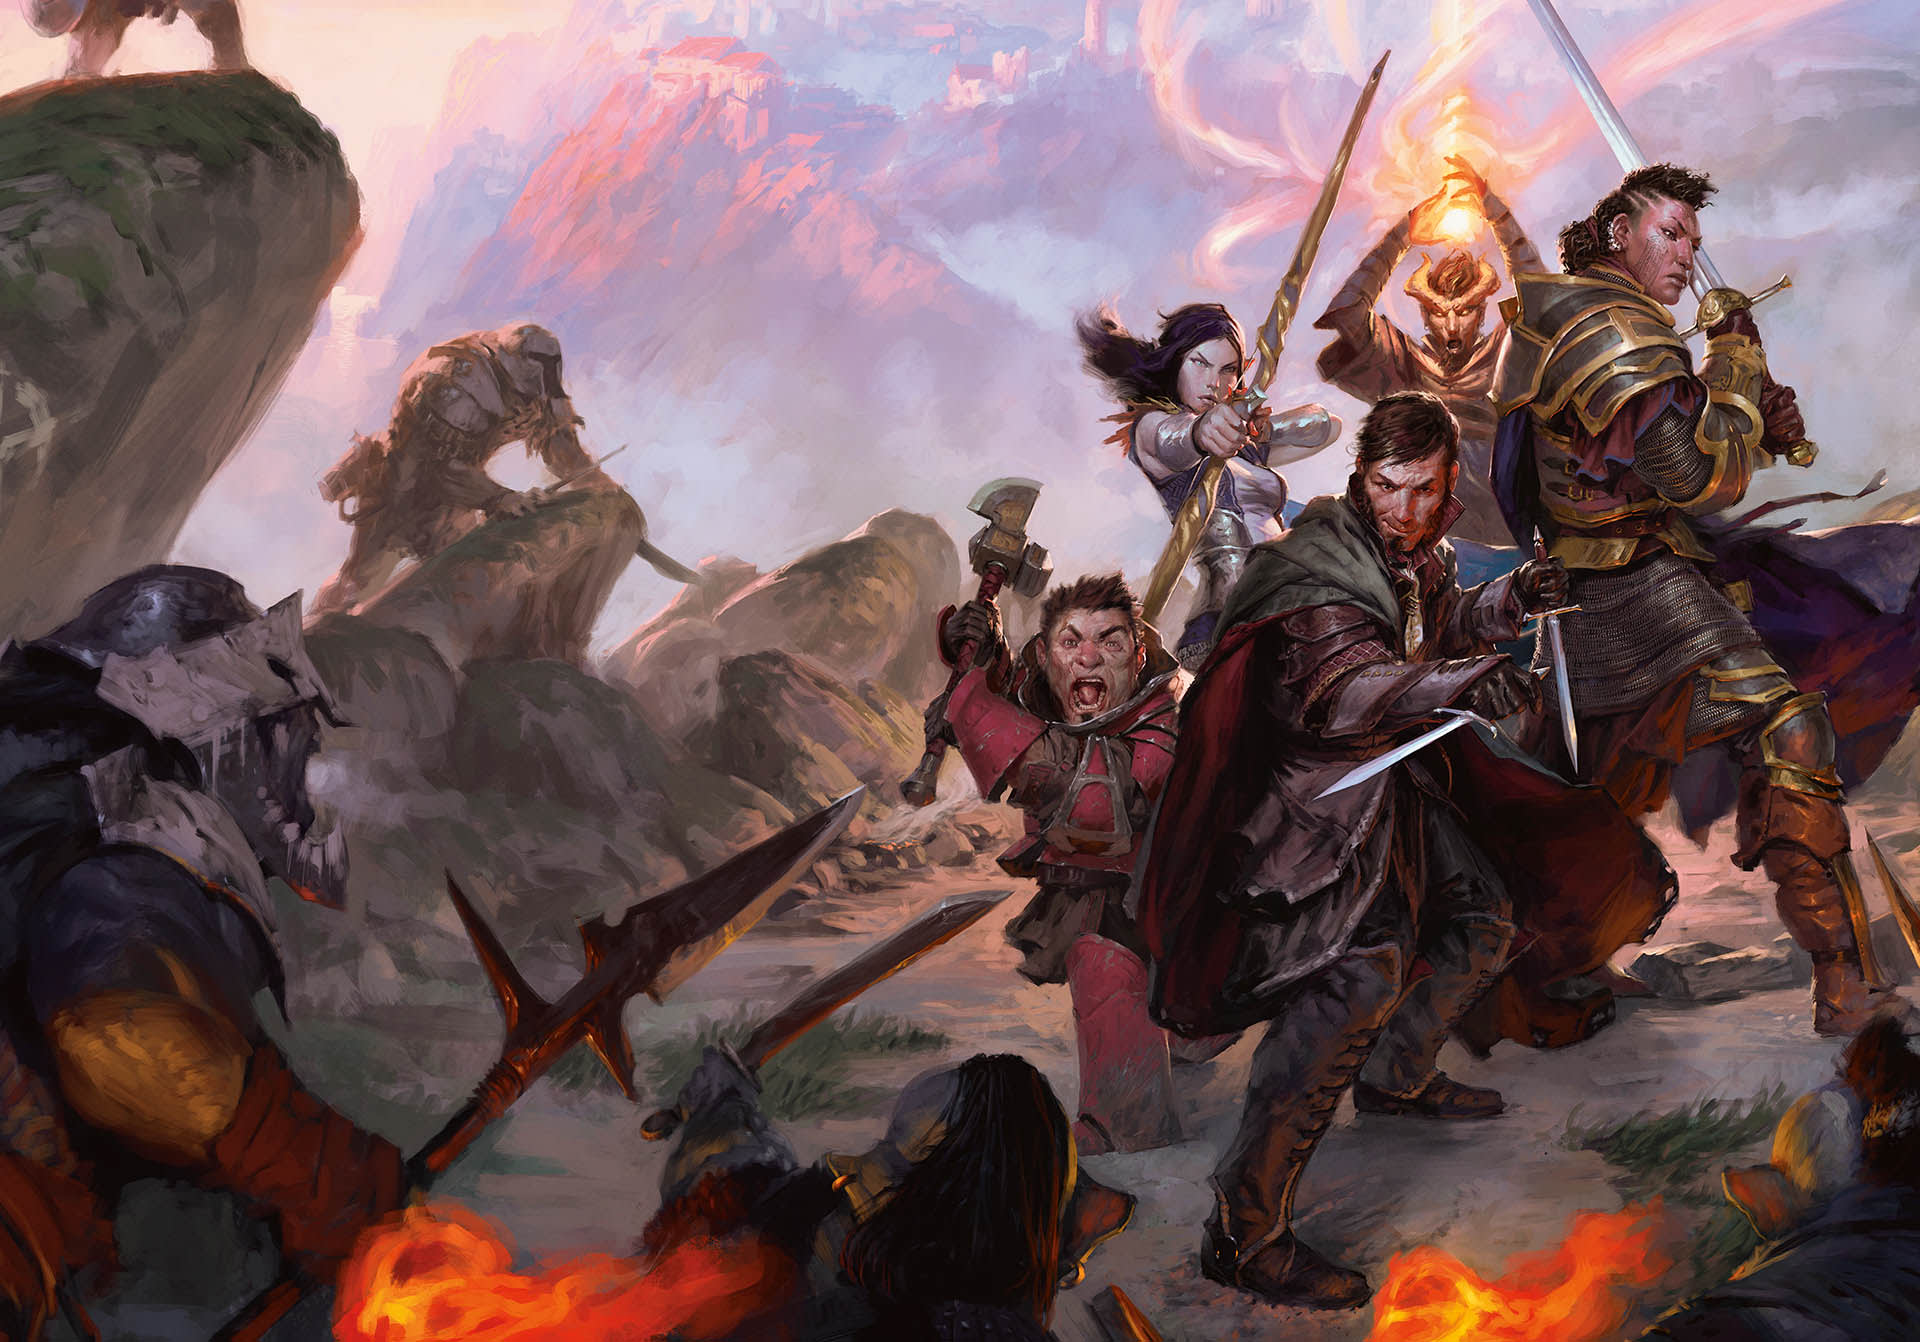 Dungeons & Dragons, Unerthed Arcana is coming, the Player's Handbook